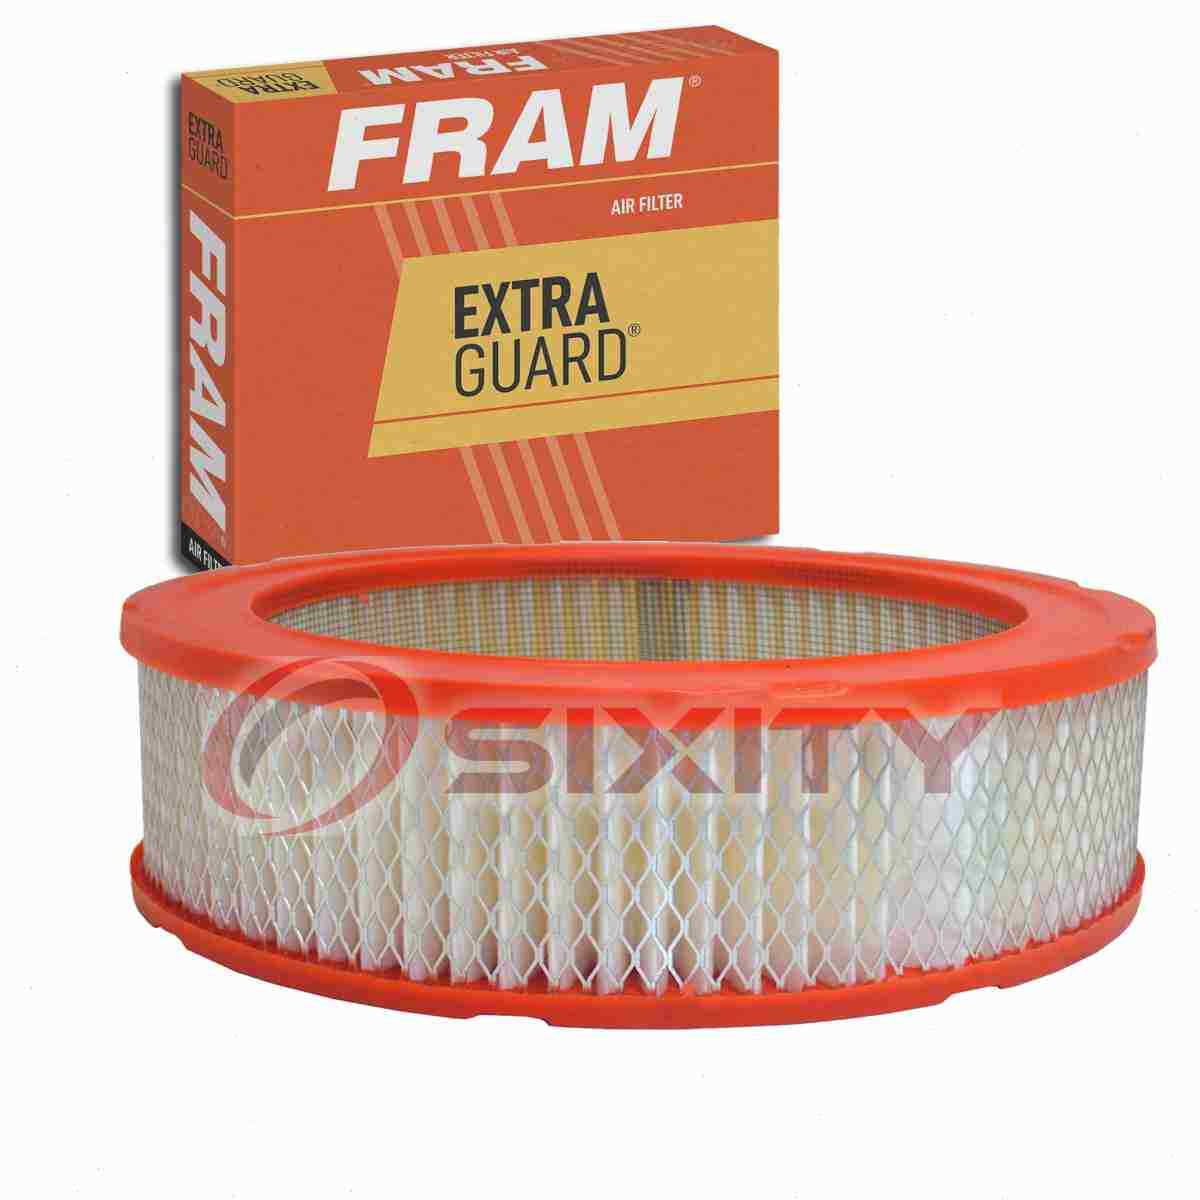 FRAM Extra Guard Air Filter for 1975-1989 Dodge D100 Intake Inlet Manifold rw